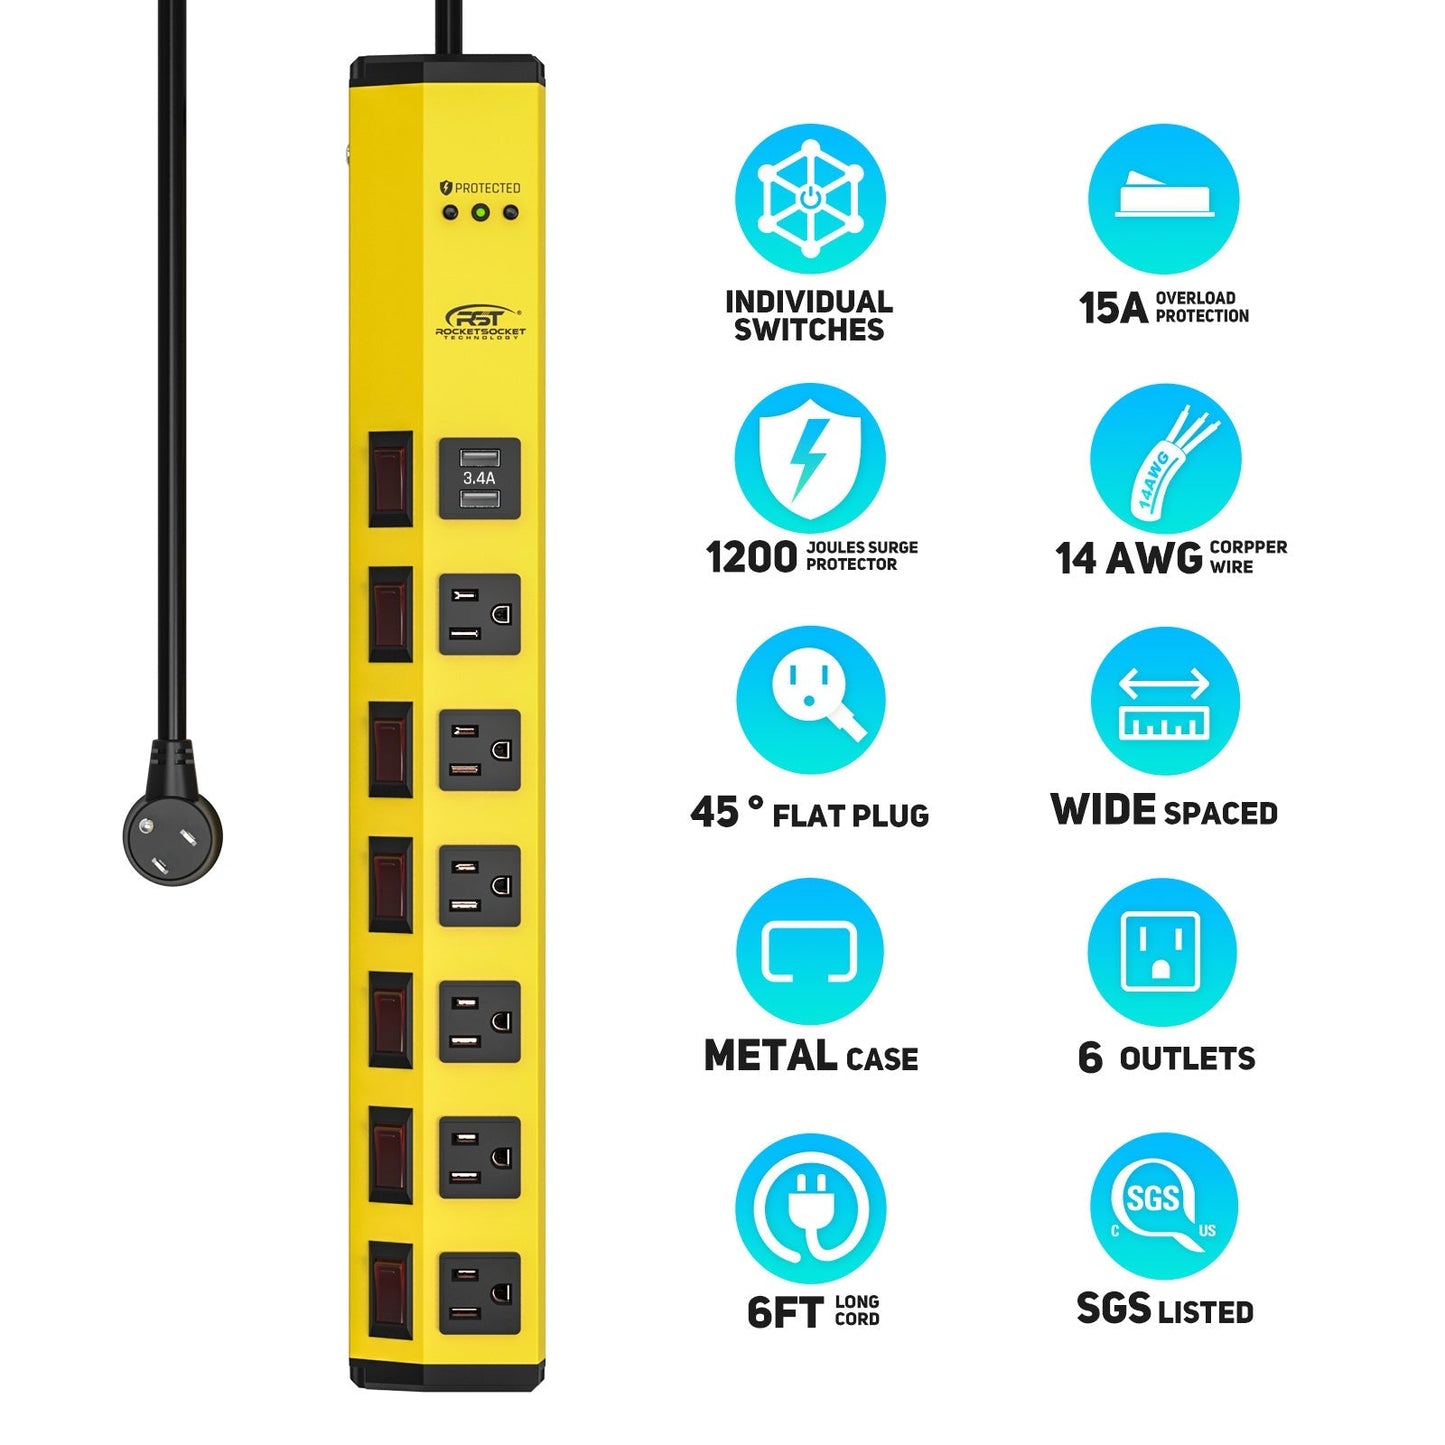 ROCKETSOCKETTECH power strip CRST 6-Outlets with USB(3.4A) 6 ft. Heavy Duty Surge Protector Power Strip 15A